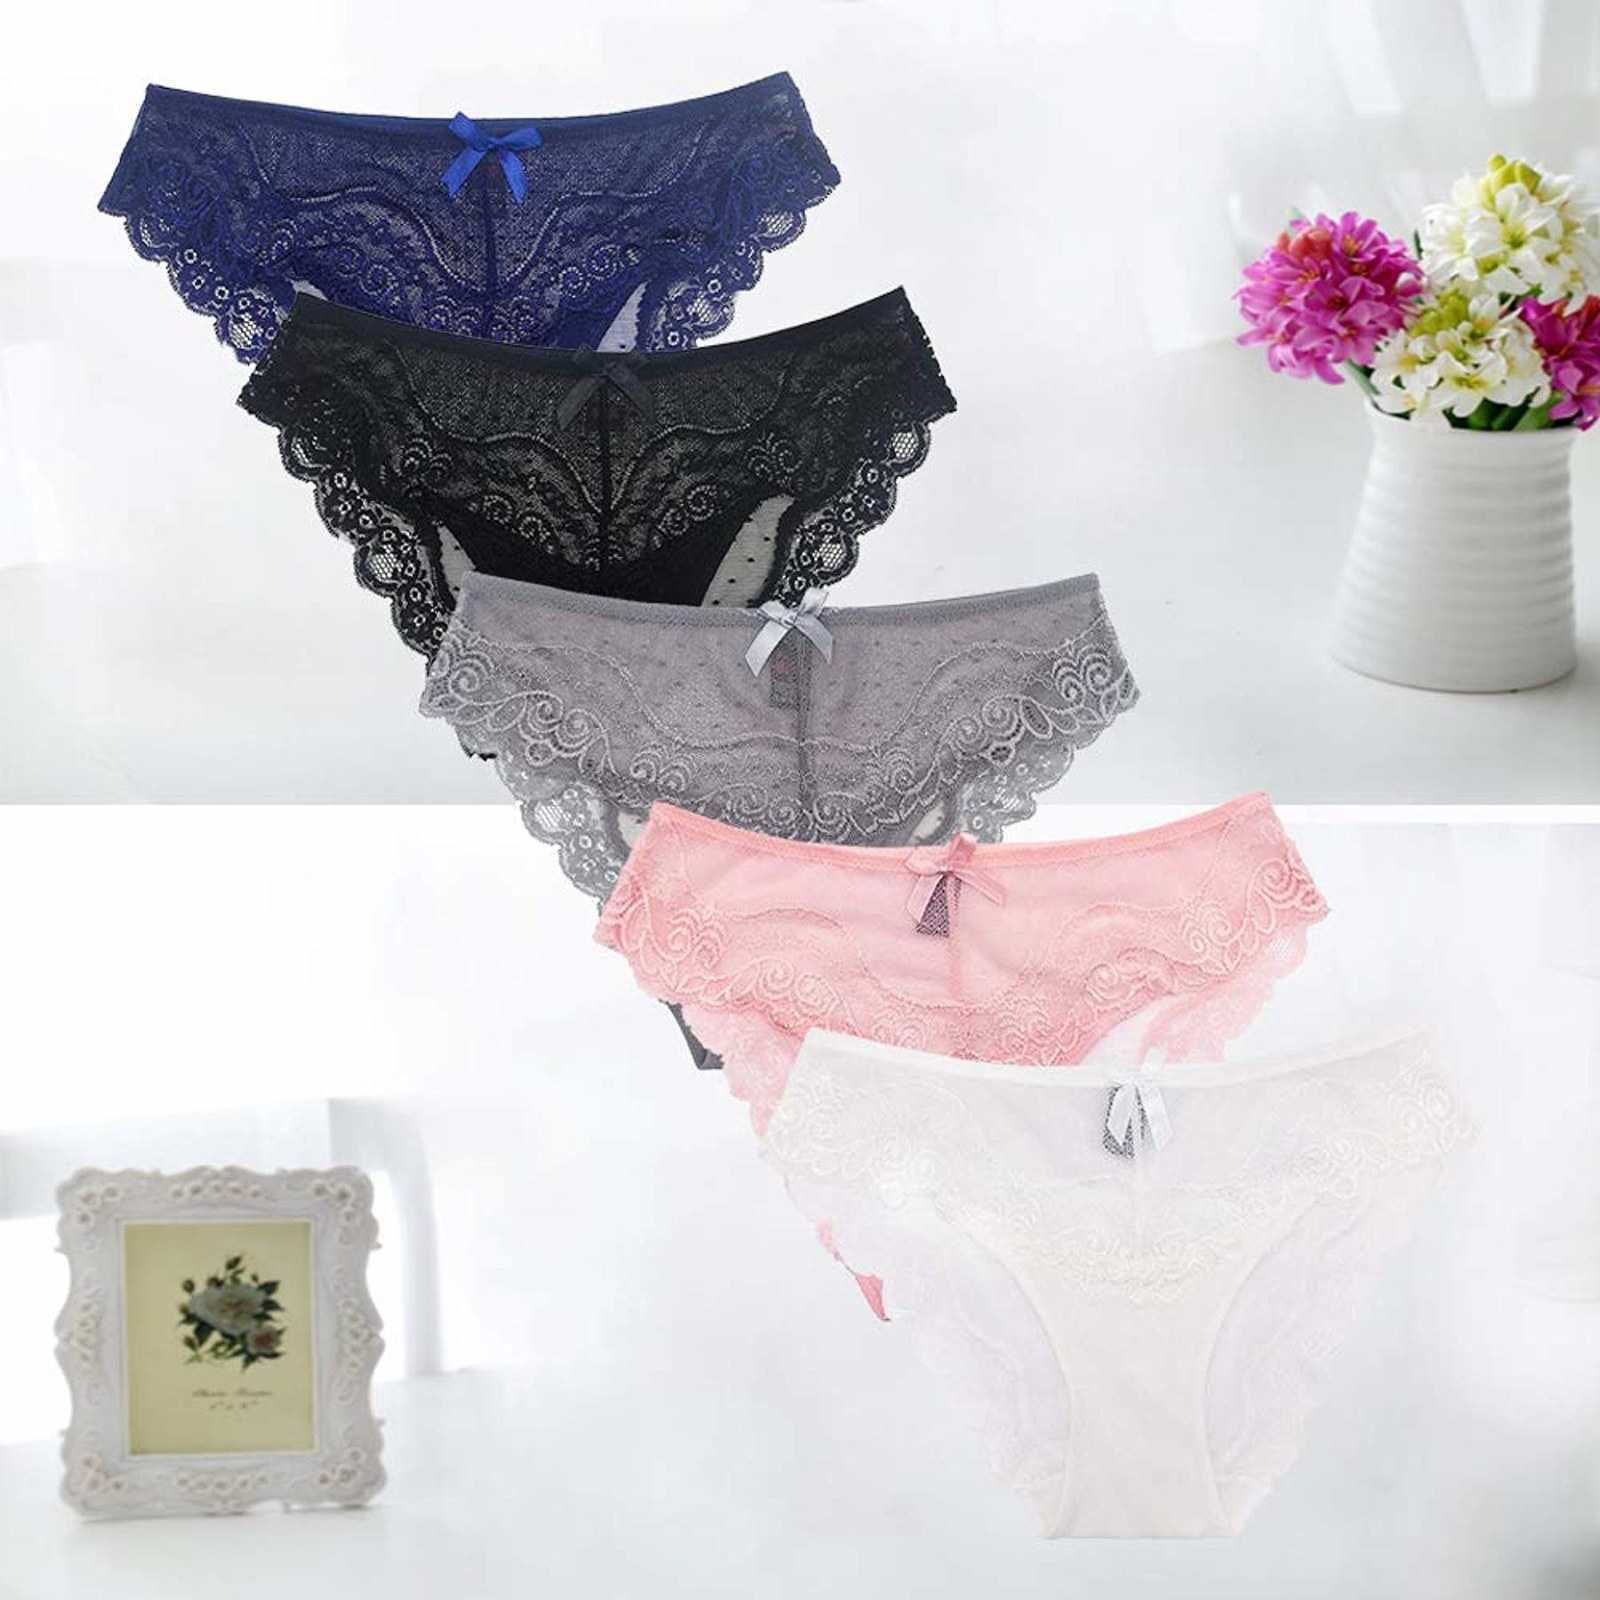 five pairs of underwear in blue, black, gray, pink, and white